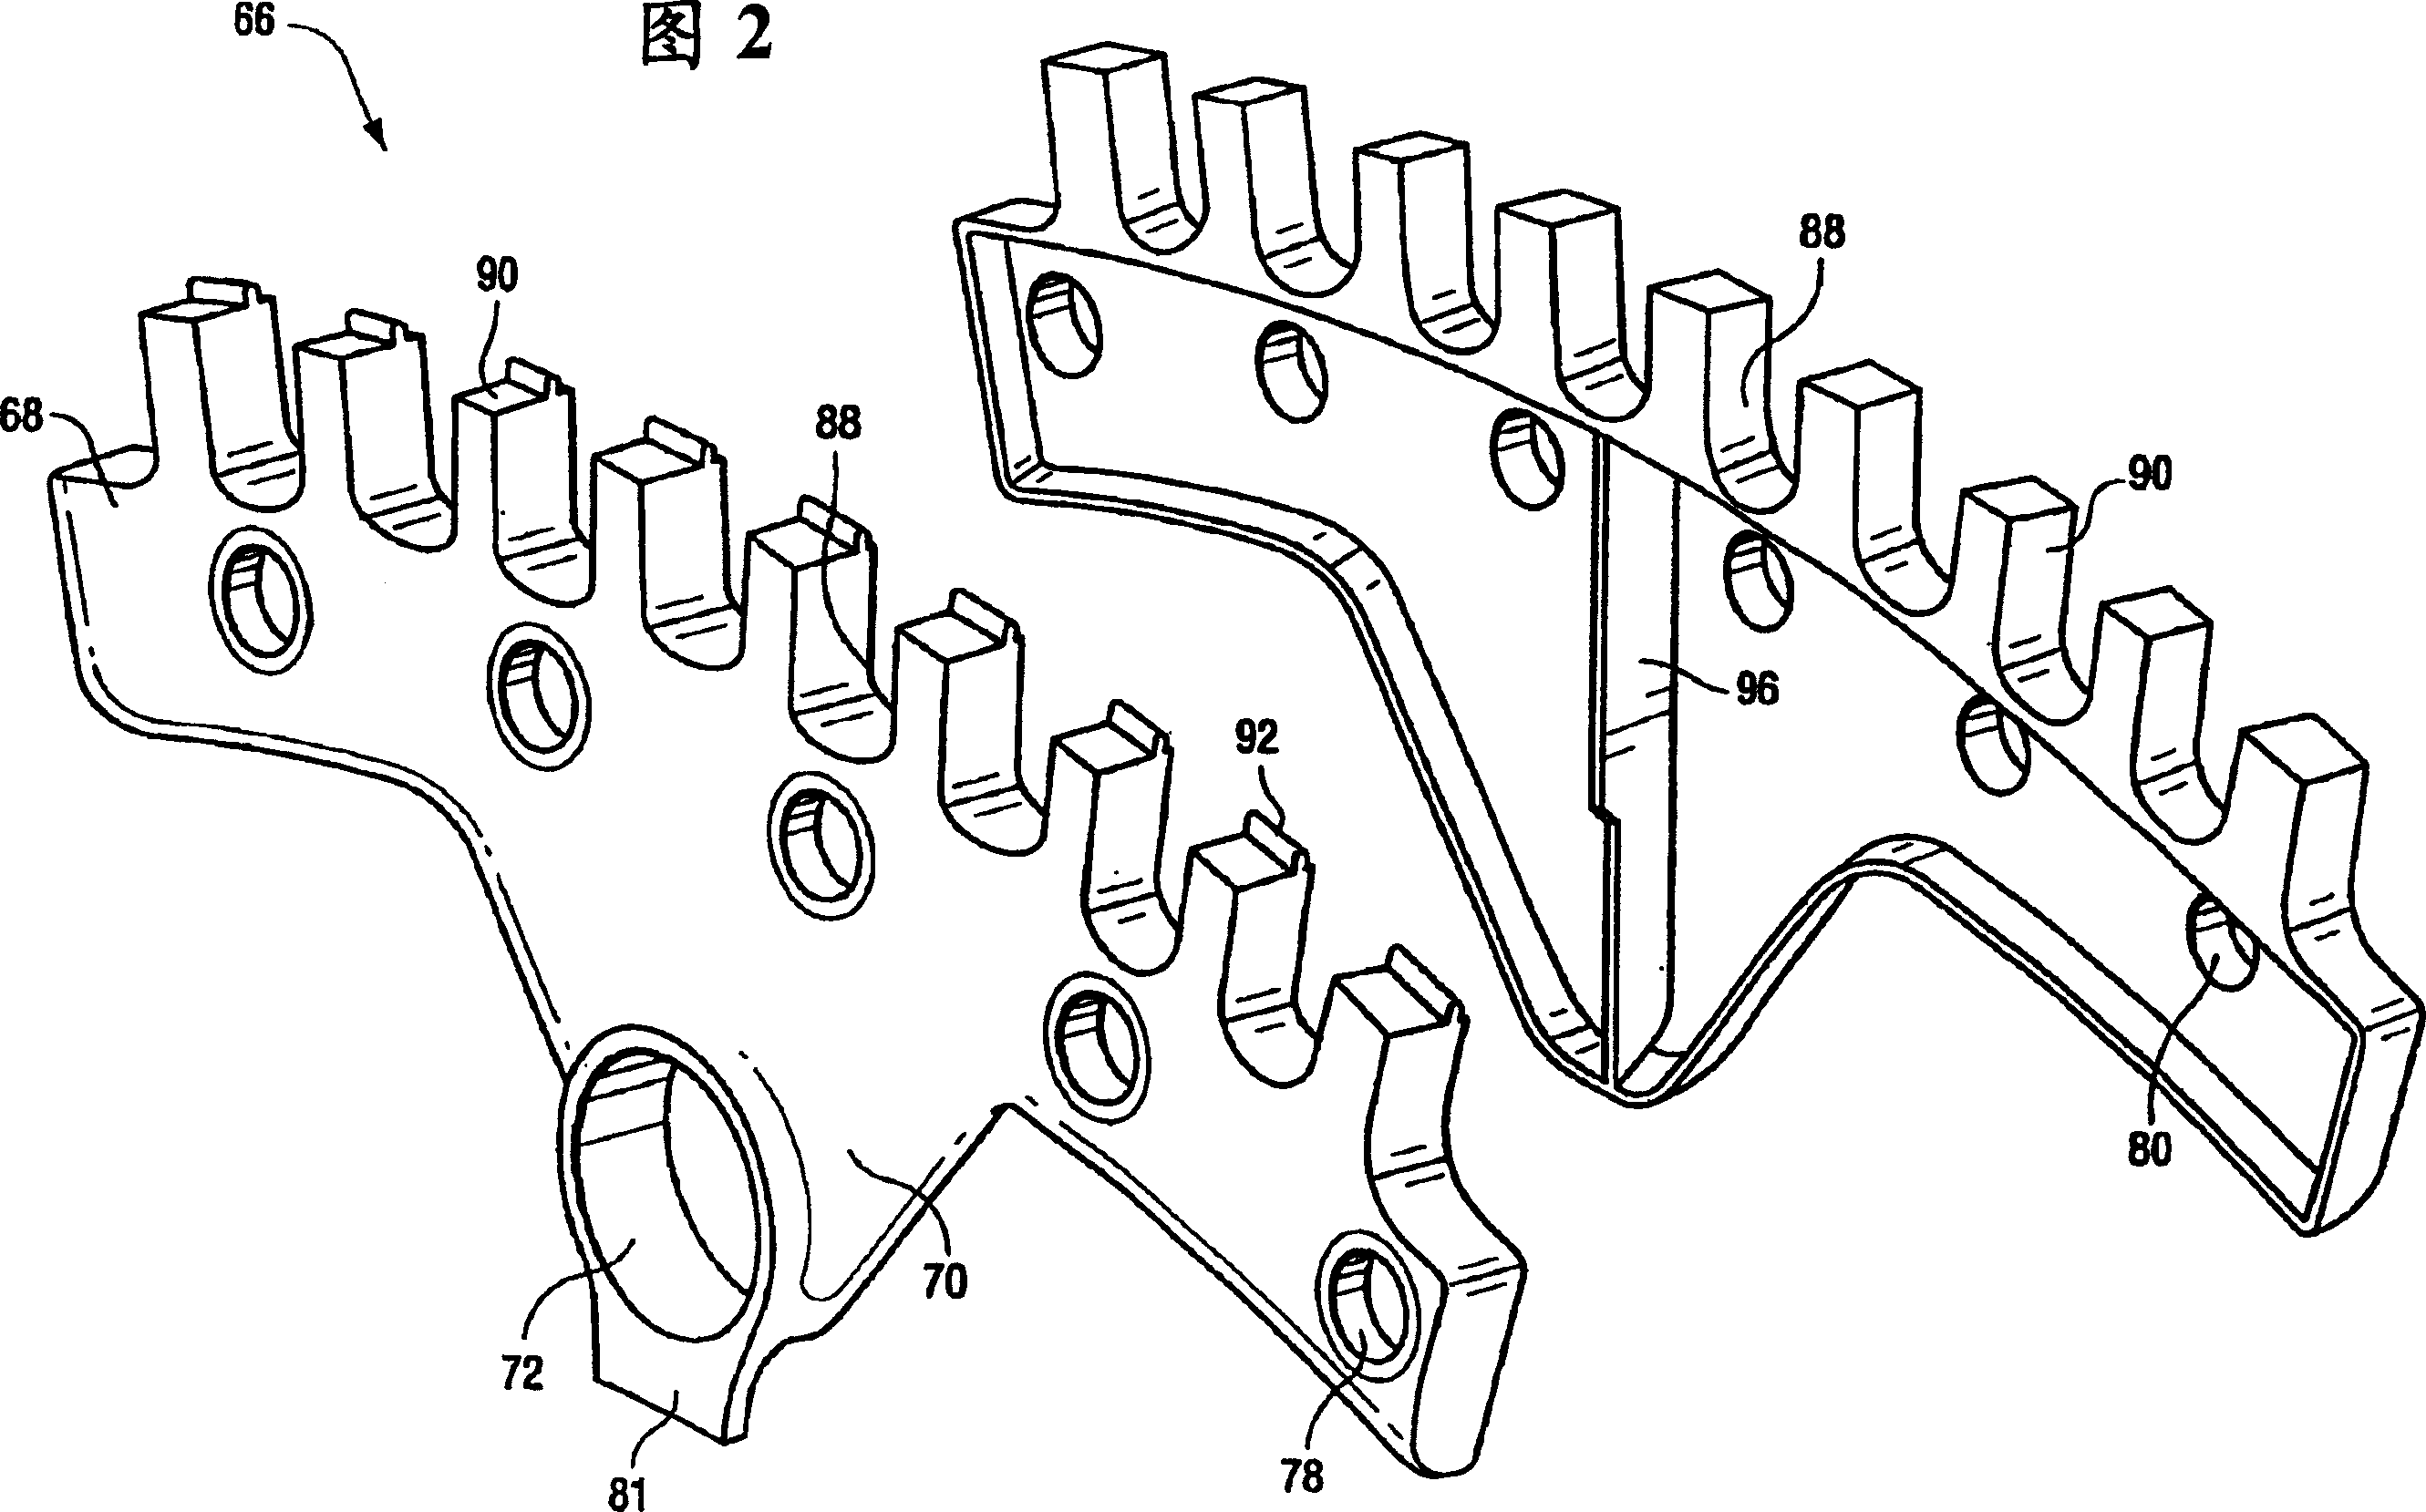 Cooling system for gas turbine